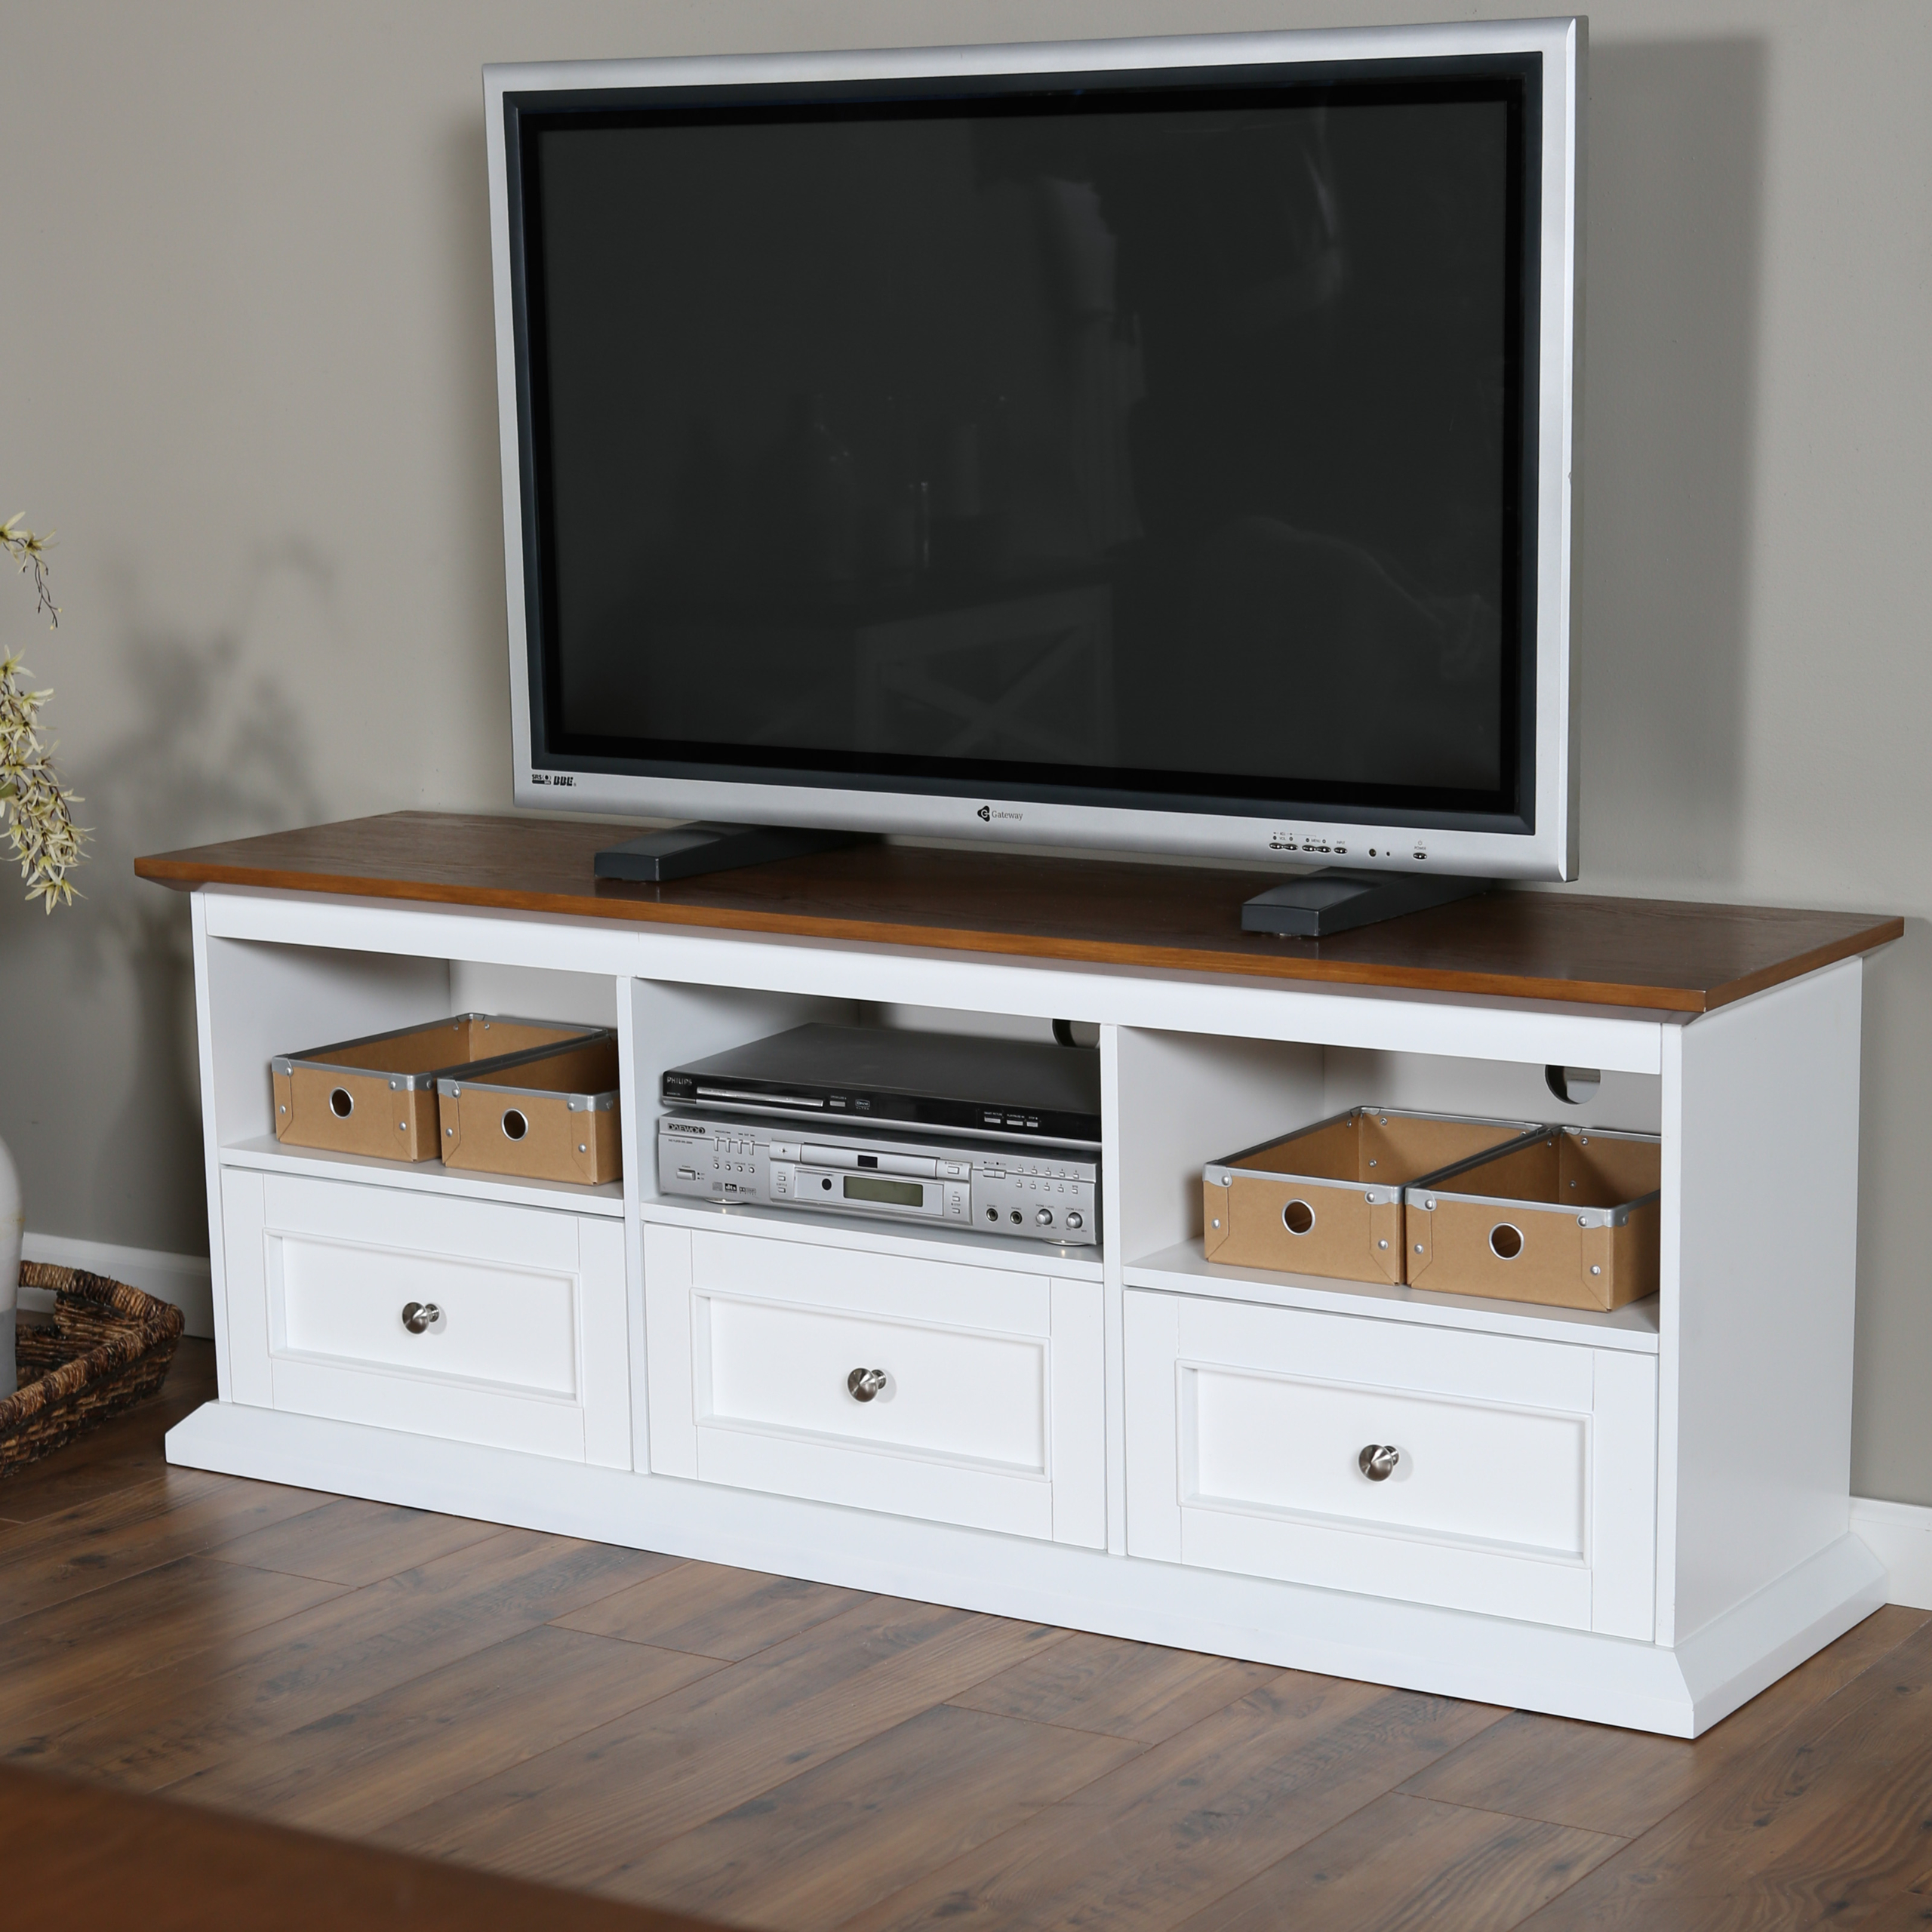 Details about   Cabinet and Entertainment ceter both custom made white oak